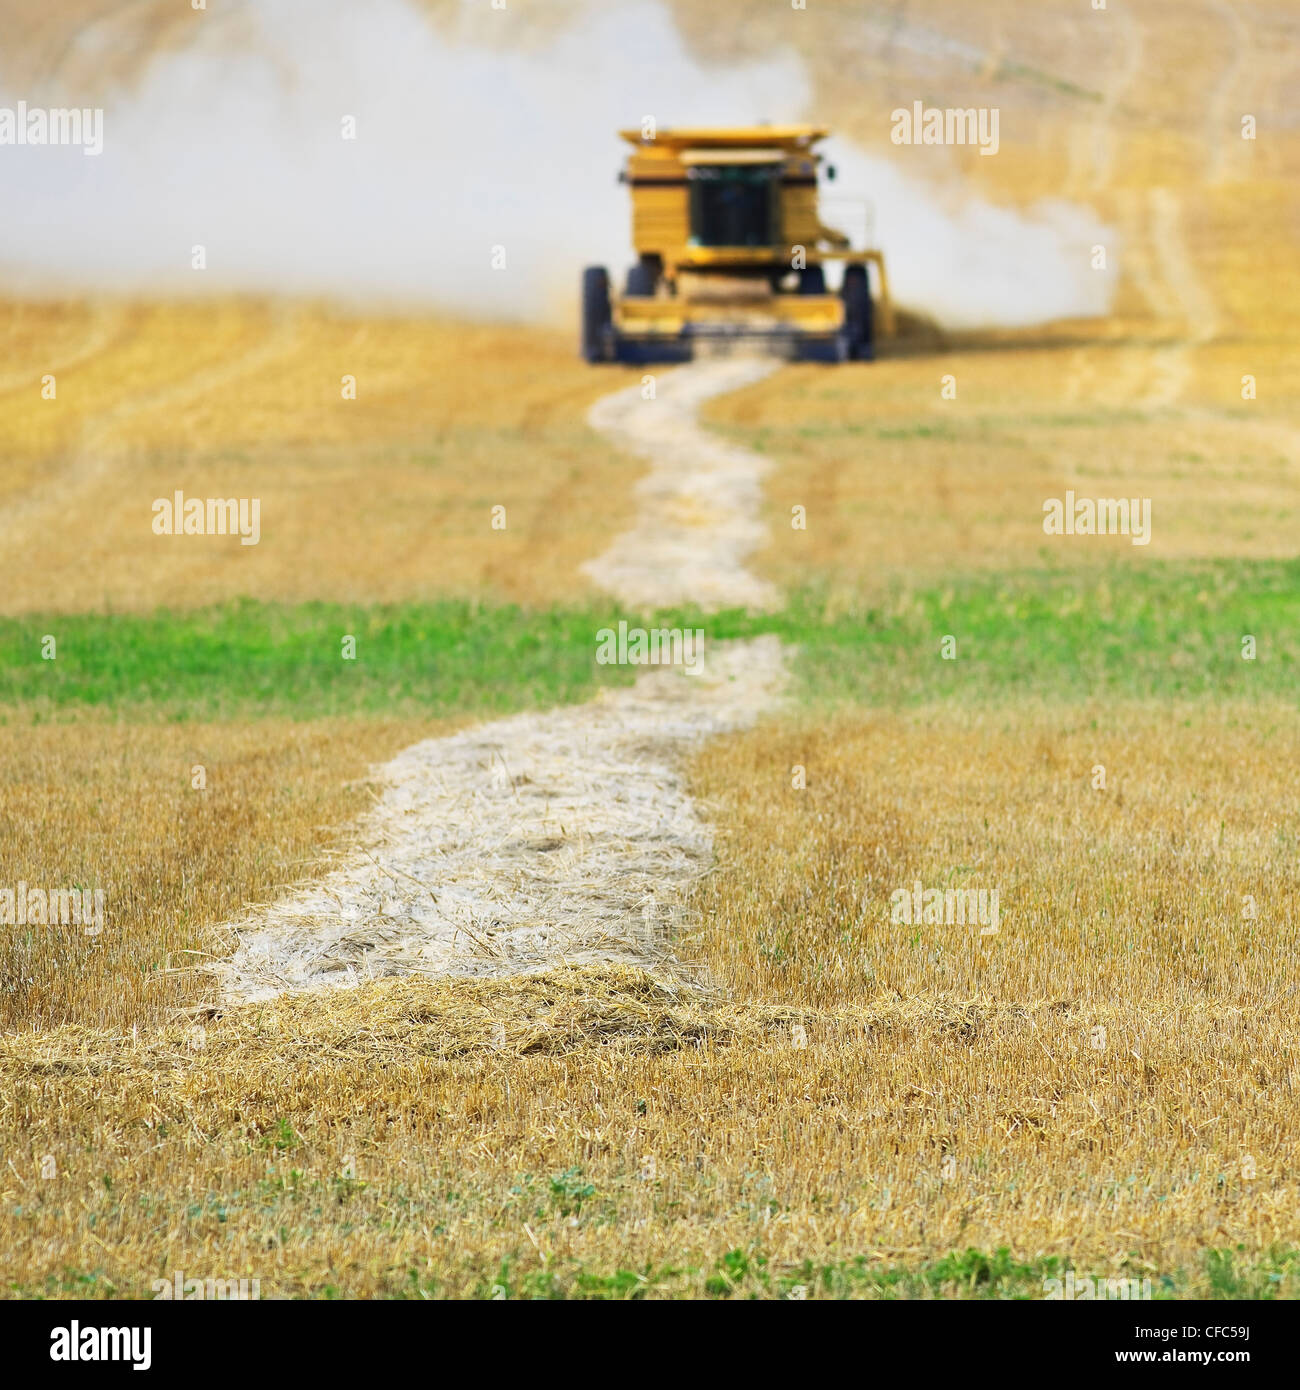 Combine harvester collecting a field of swathed wheat. Near Somerset, Manitoba, Canada. Stock Photo